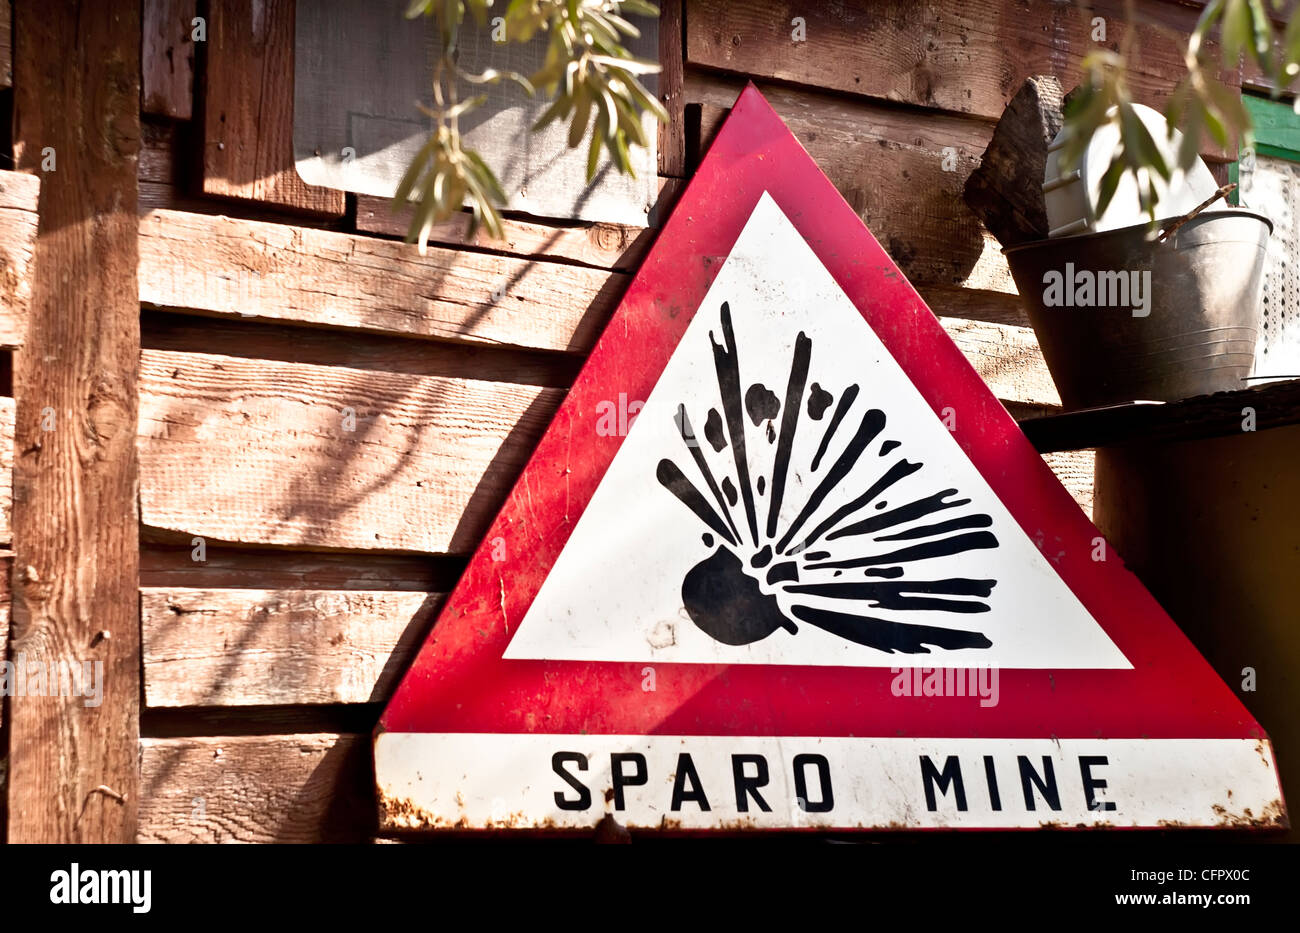 Land mine (Sparo mine) keep out warning sign. Danger mines sign Stock Photo